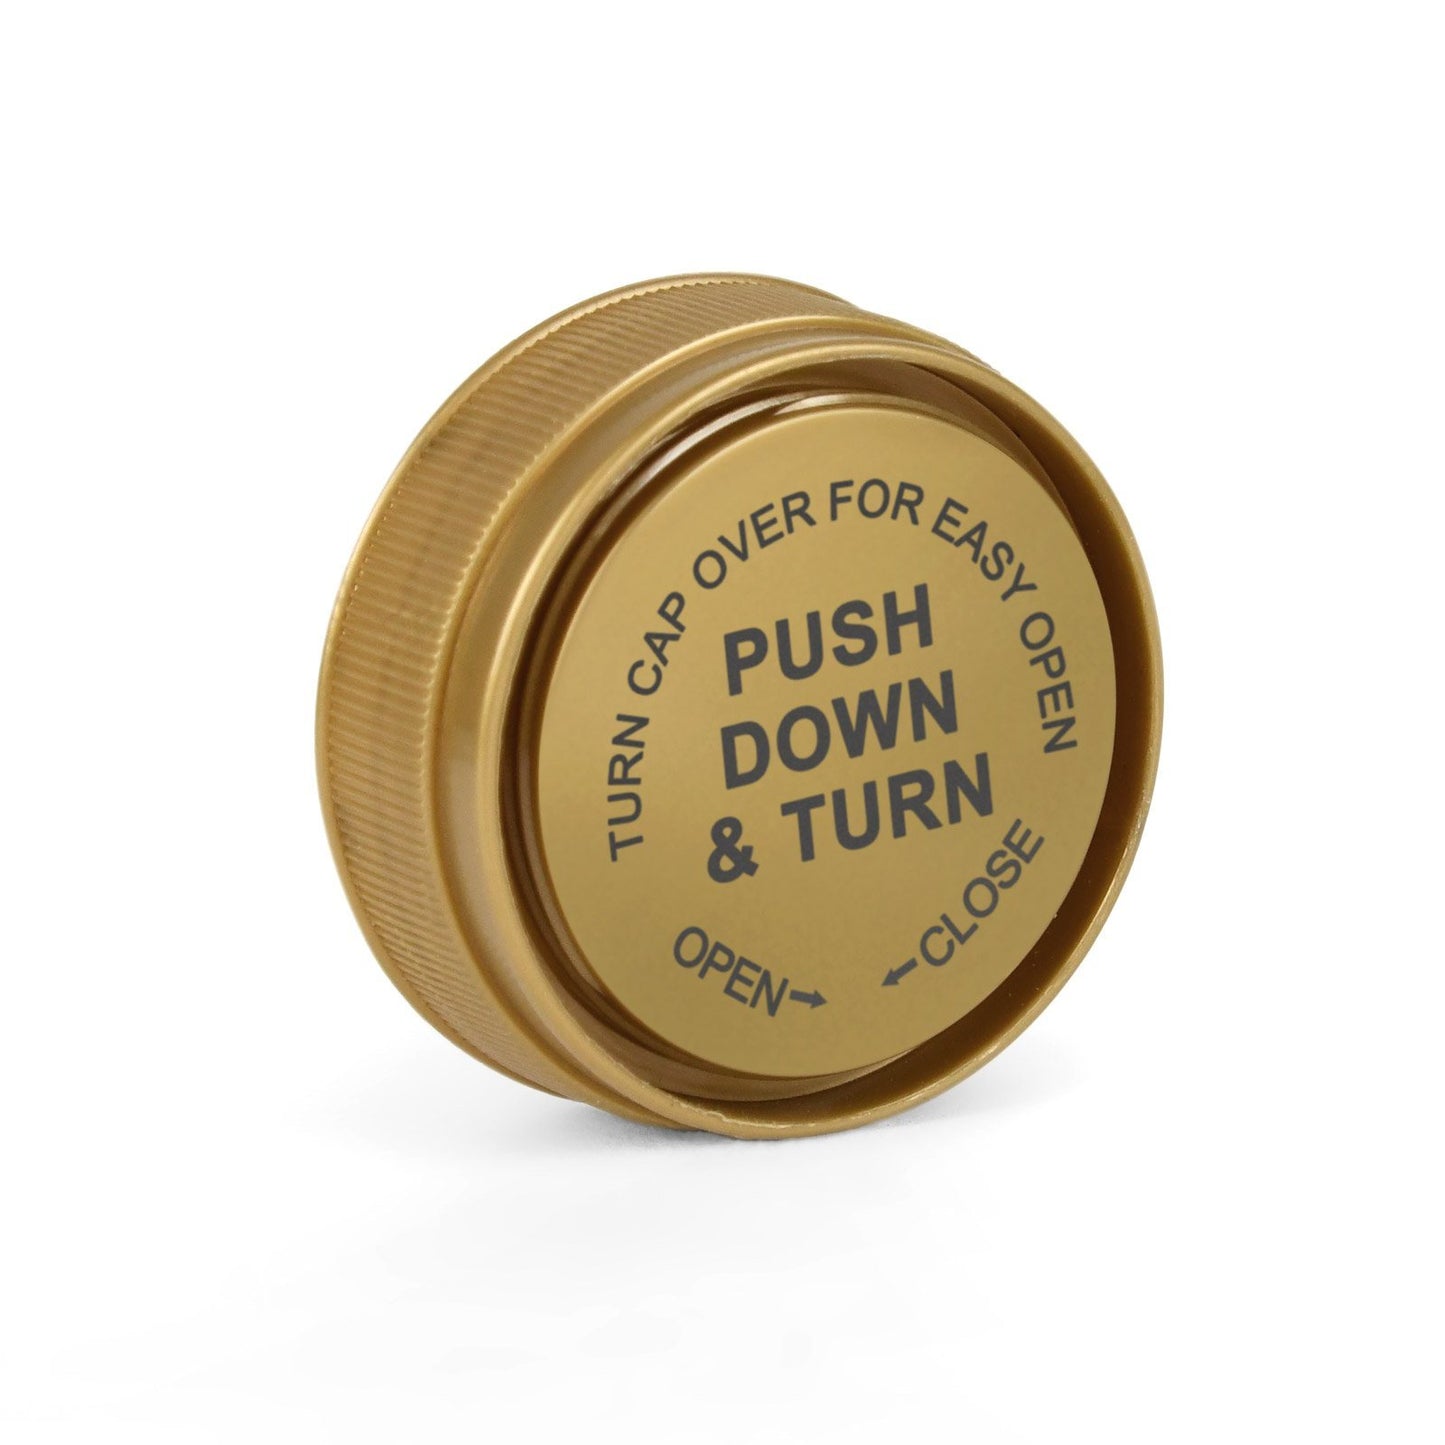 Opaque Gold 30 Dram Reversible Cap Vials for Medical Pharmacies & Dispensaries at Flower Power Packages